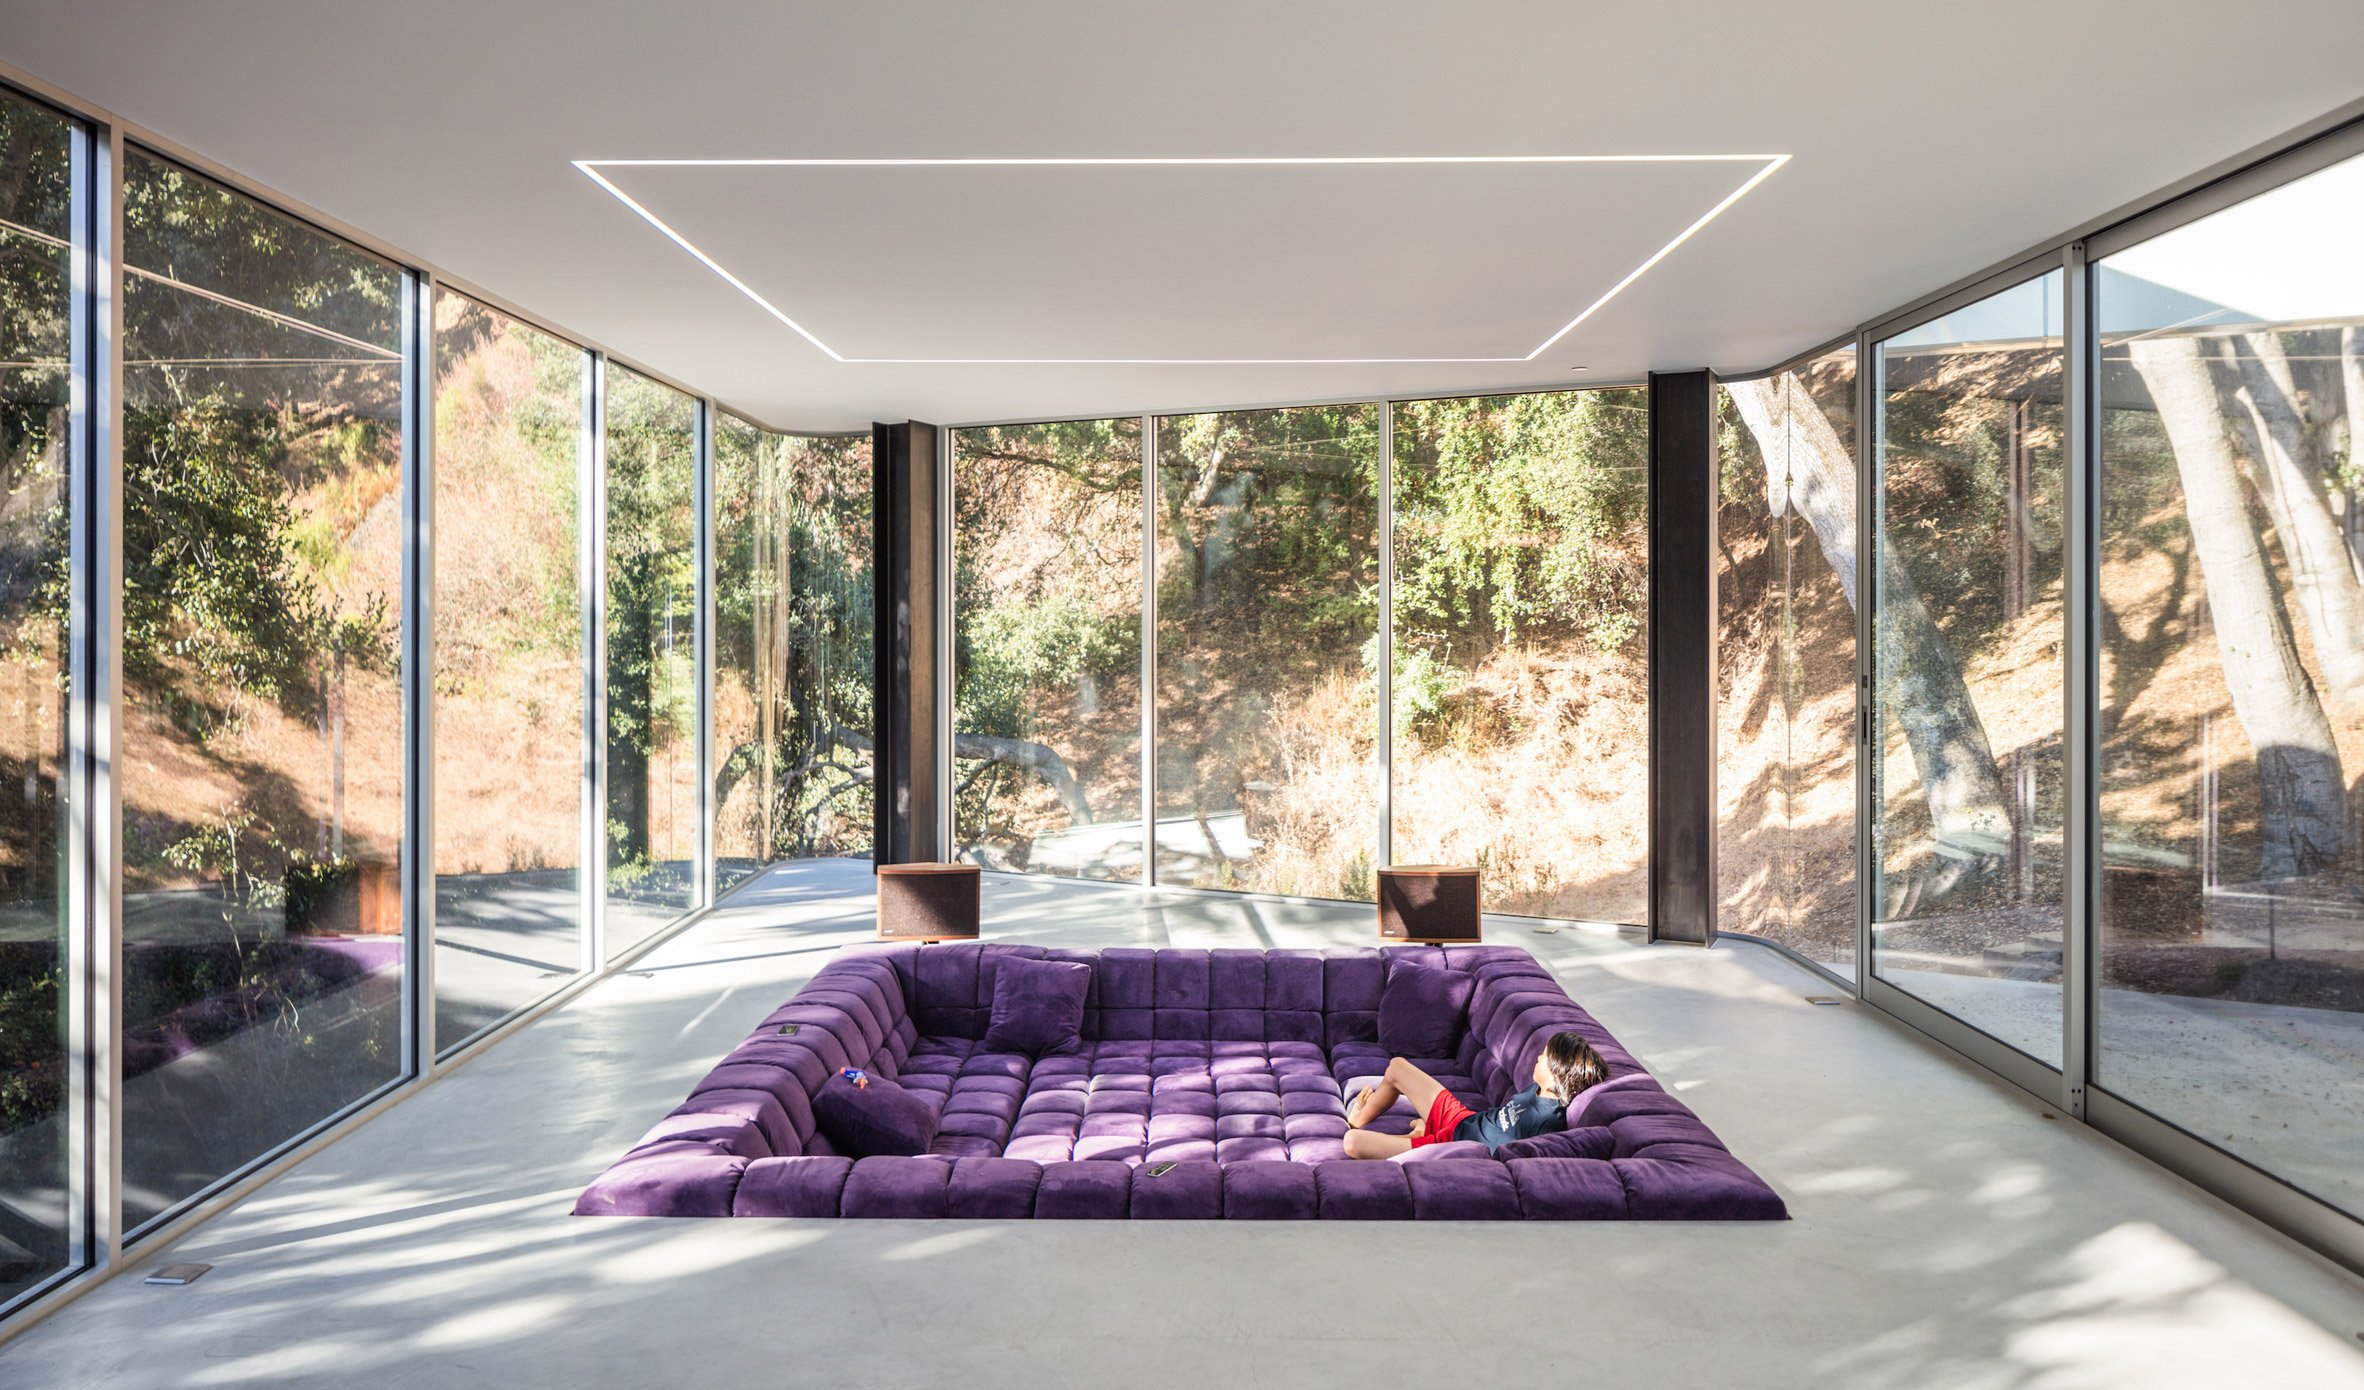 A purple sofa integrated into the living room floor